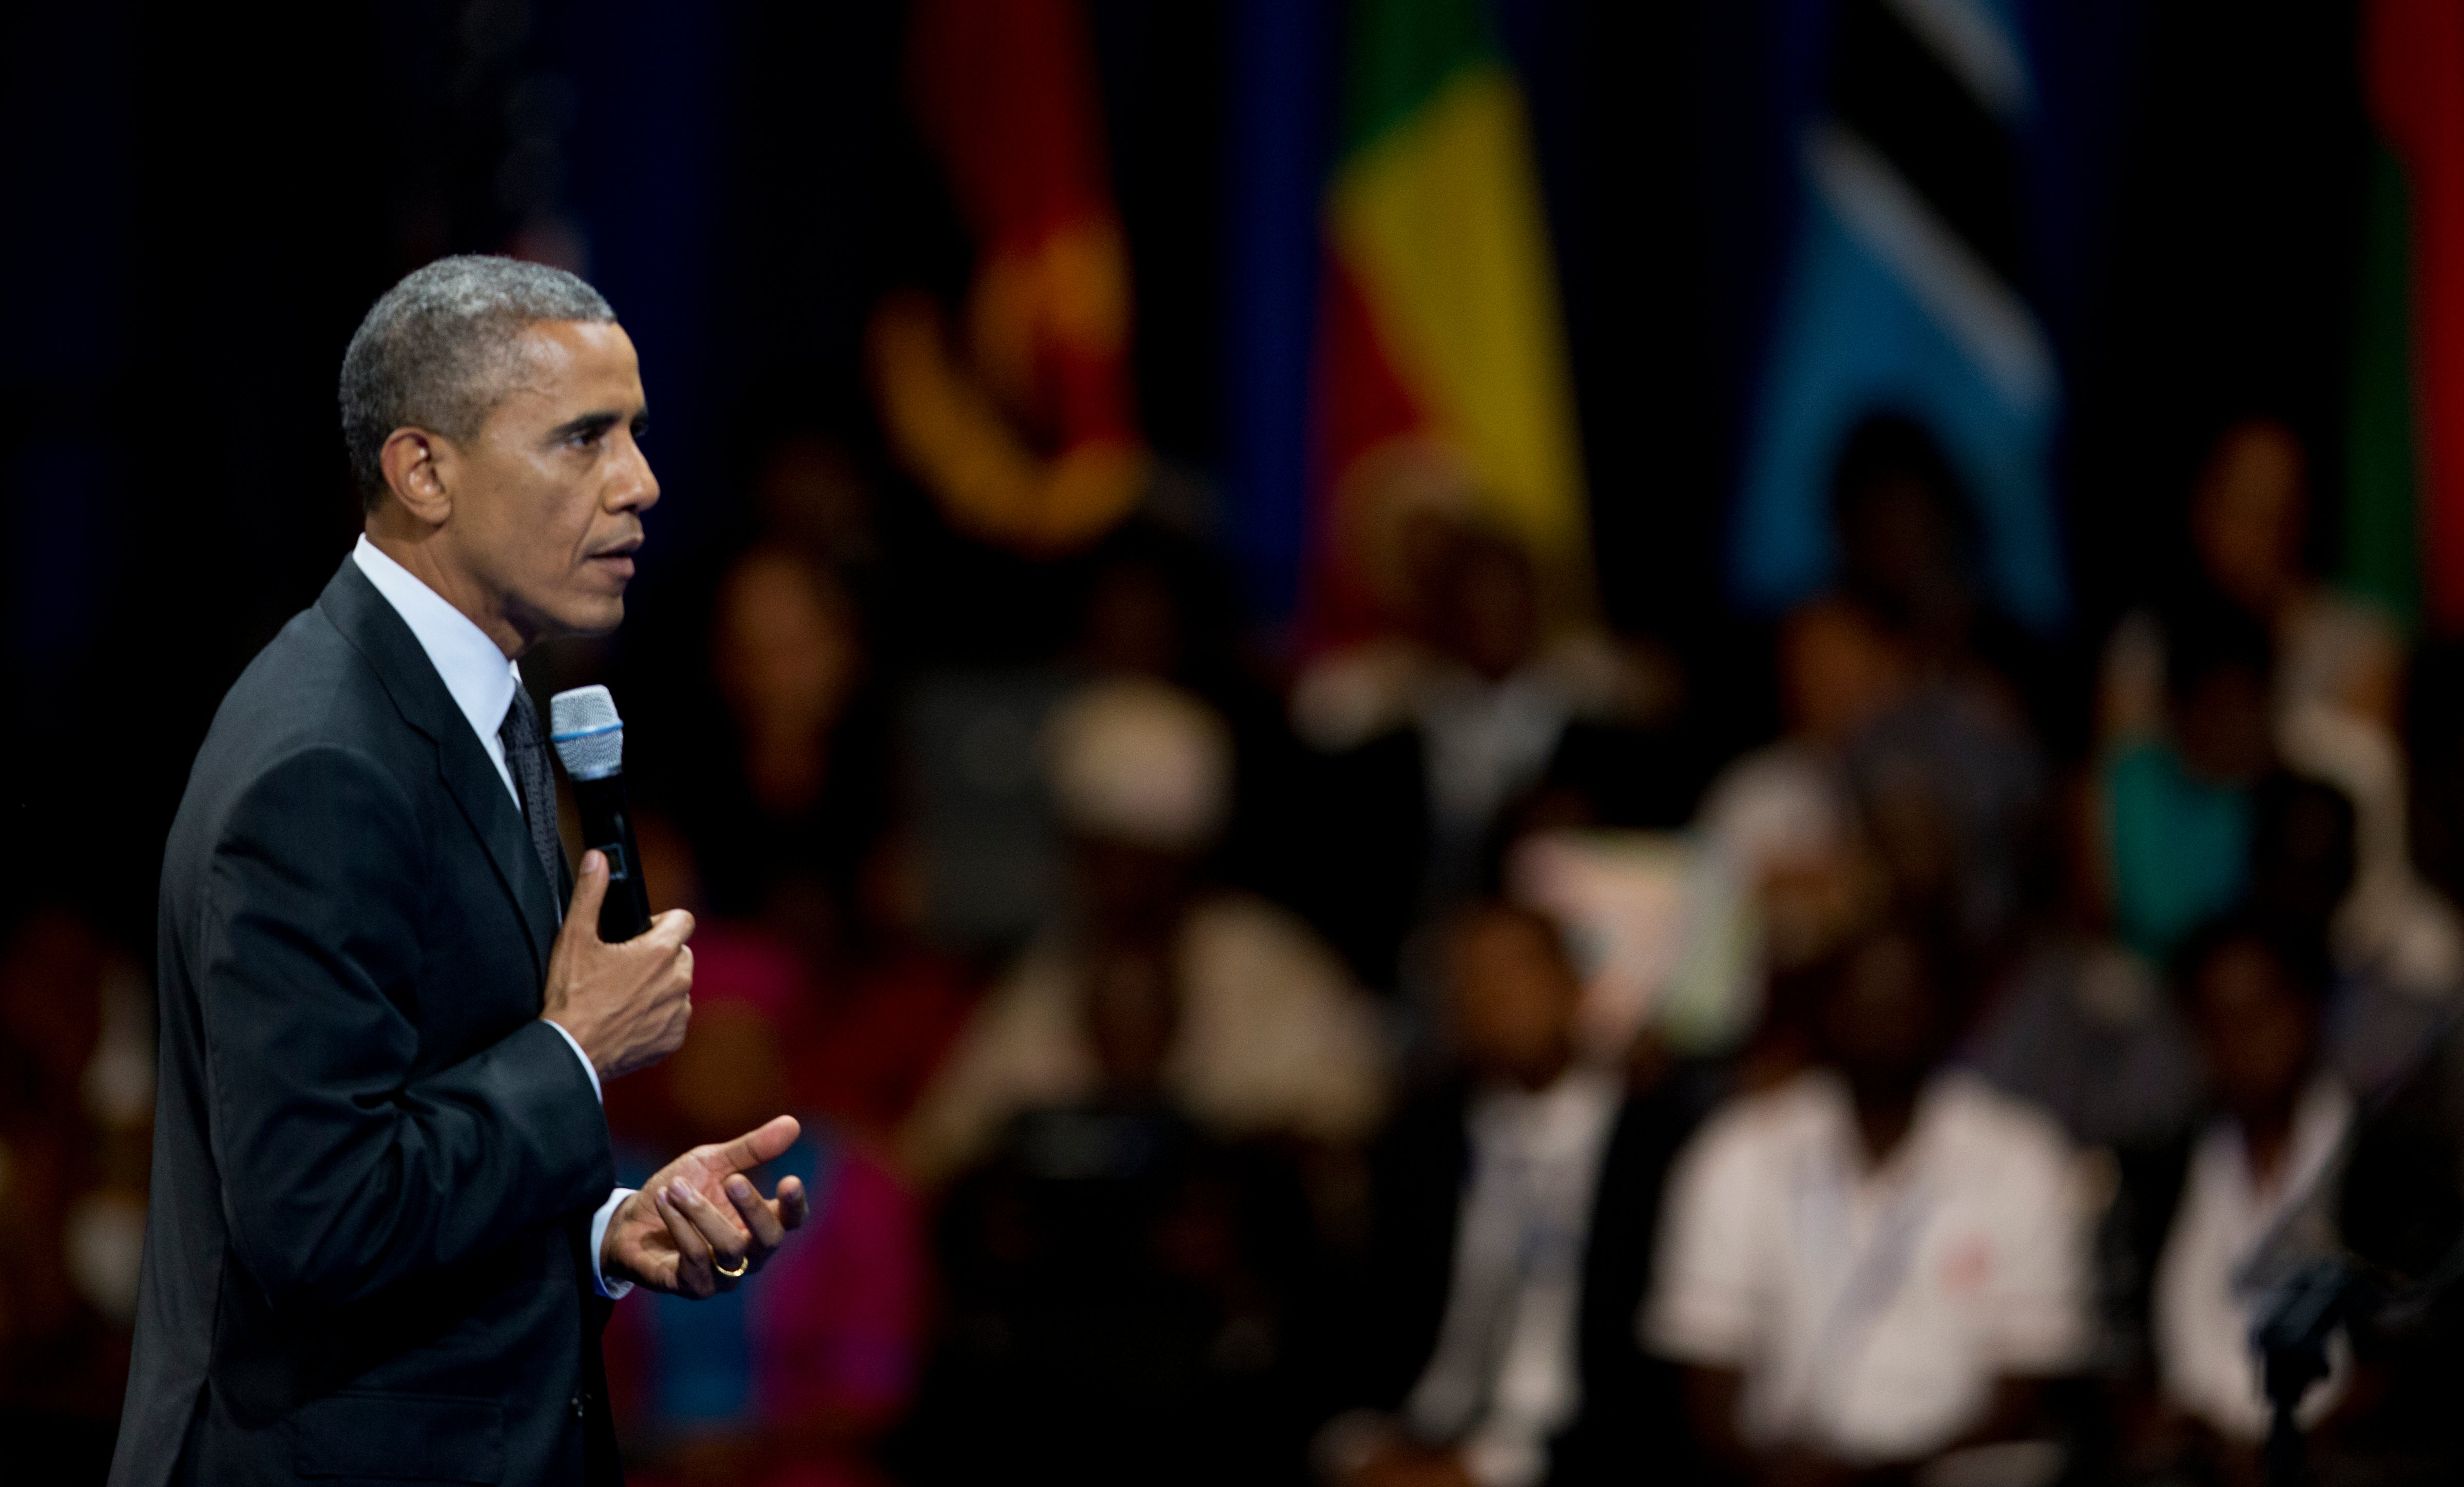 President Barack Obama speaks to participants of the Presidential Summit for the Washington Fellowship for Young African Leaders in Washington on July 28, 2014. (Manuel Balce Ceneta—AP)